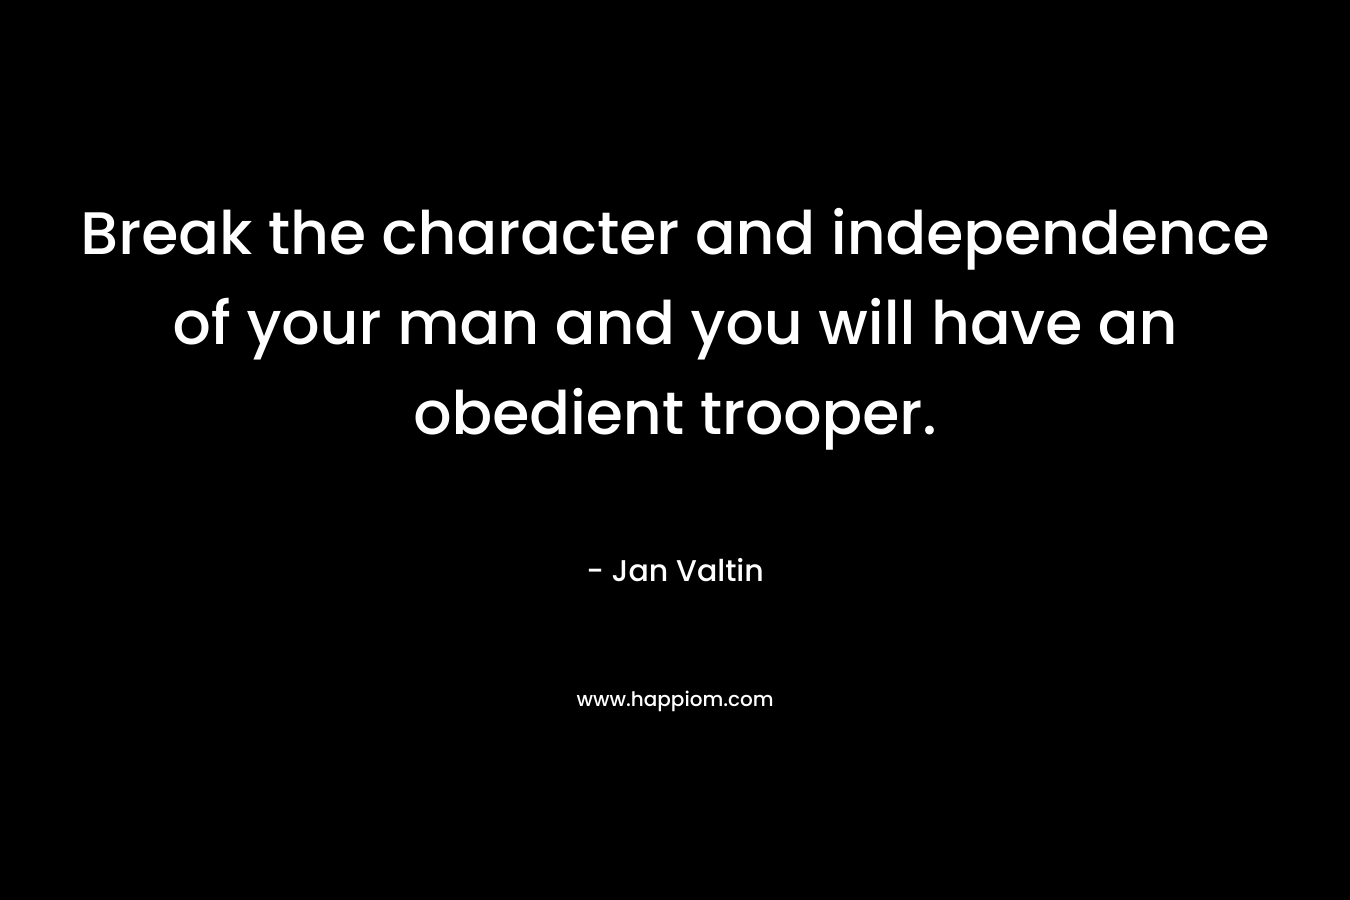 Break the character and independence of your man and you will have an obedient trooper.